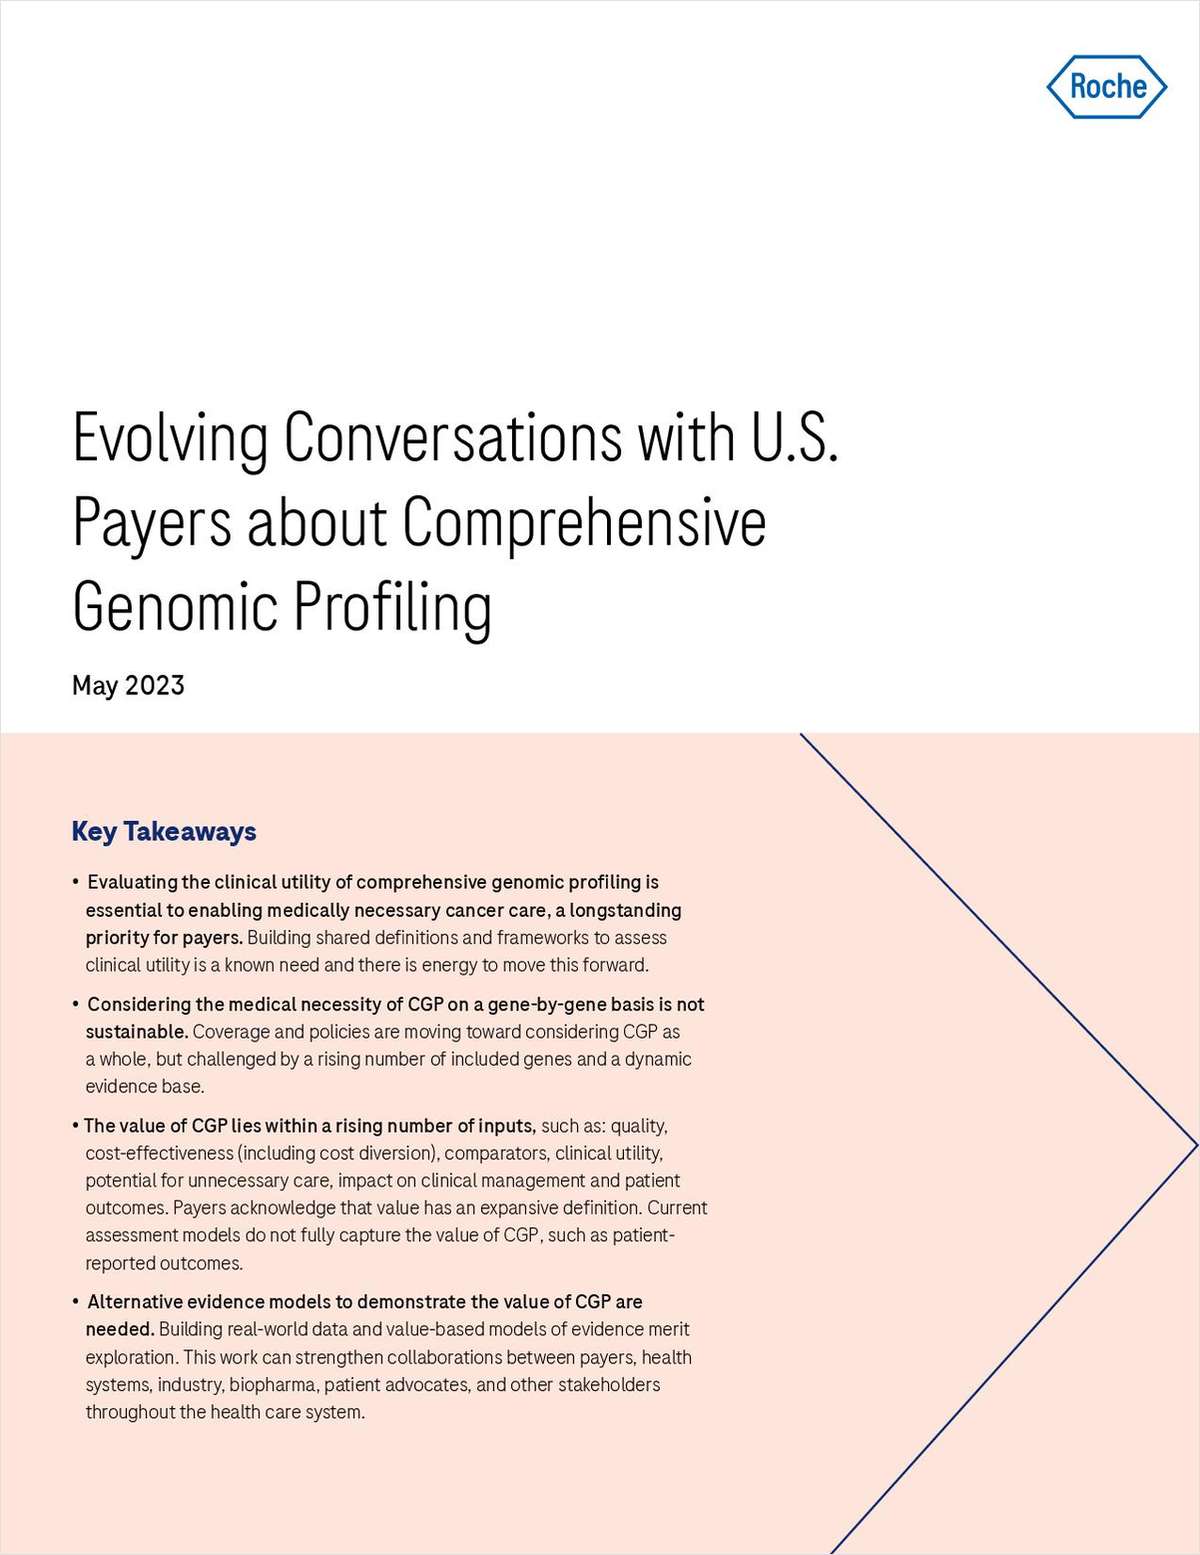 Evolving Conversations with US Payers About Comprehensive Genomic Profiling